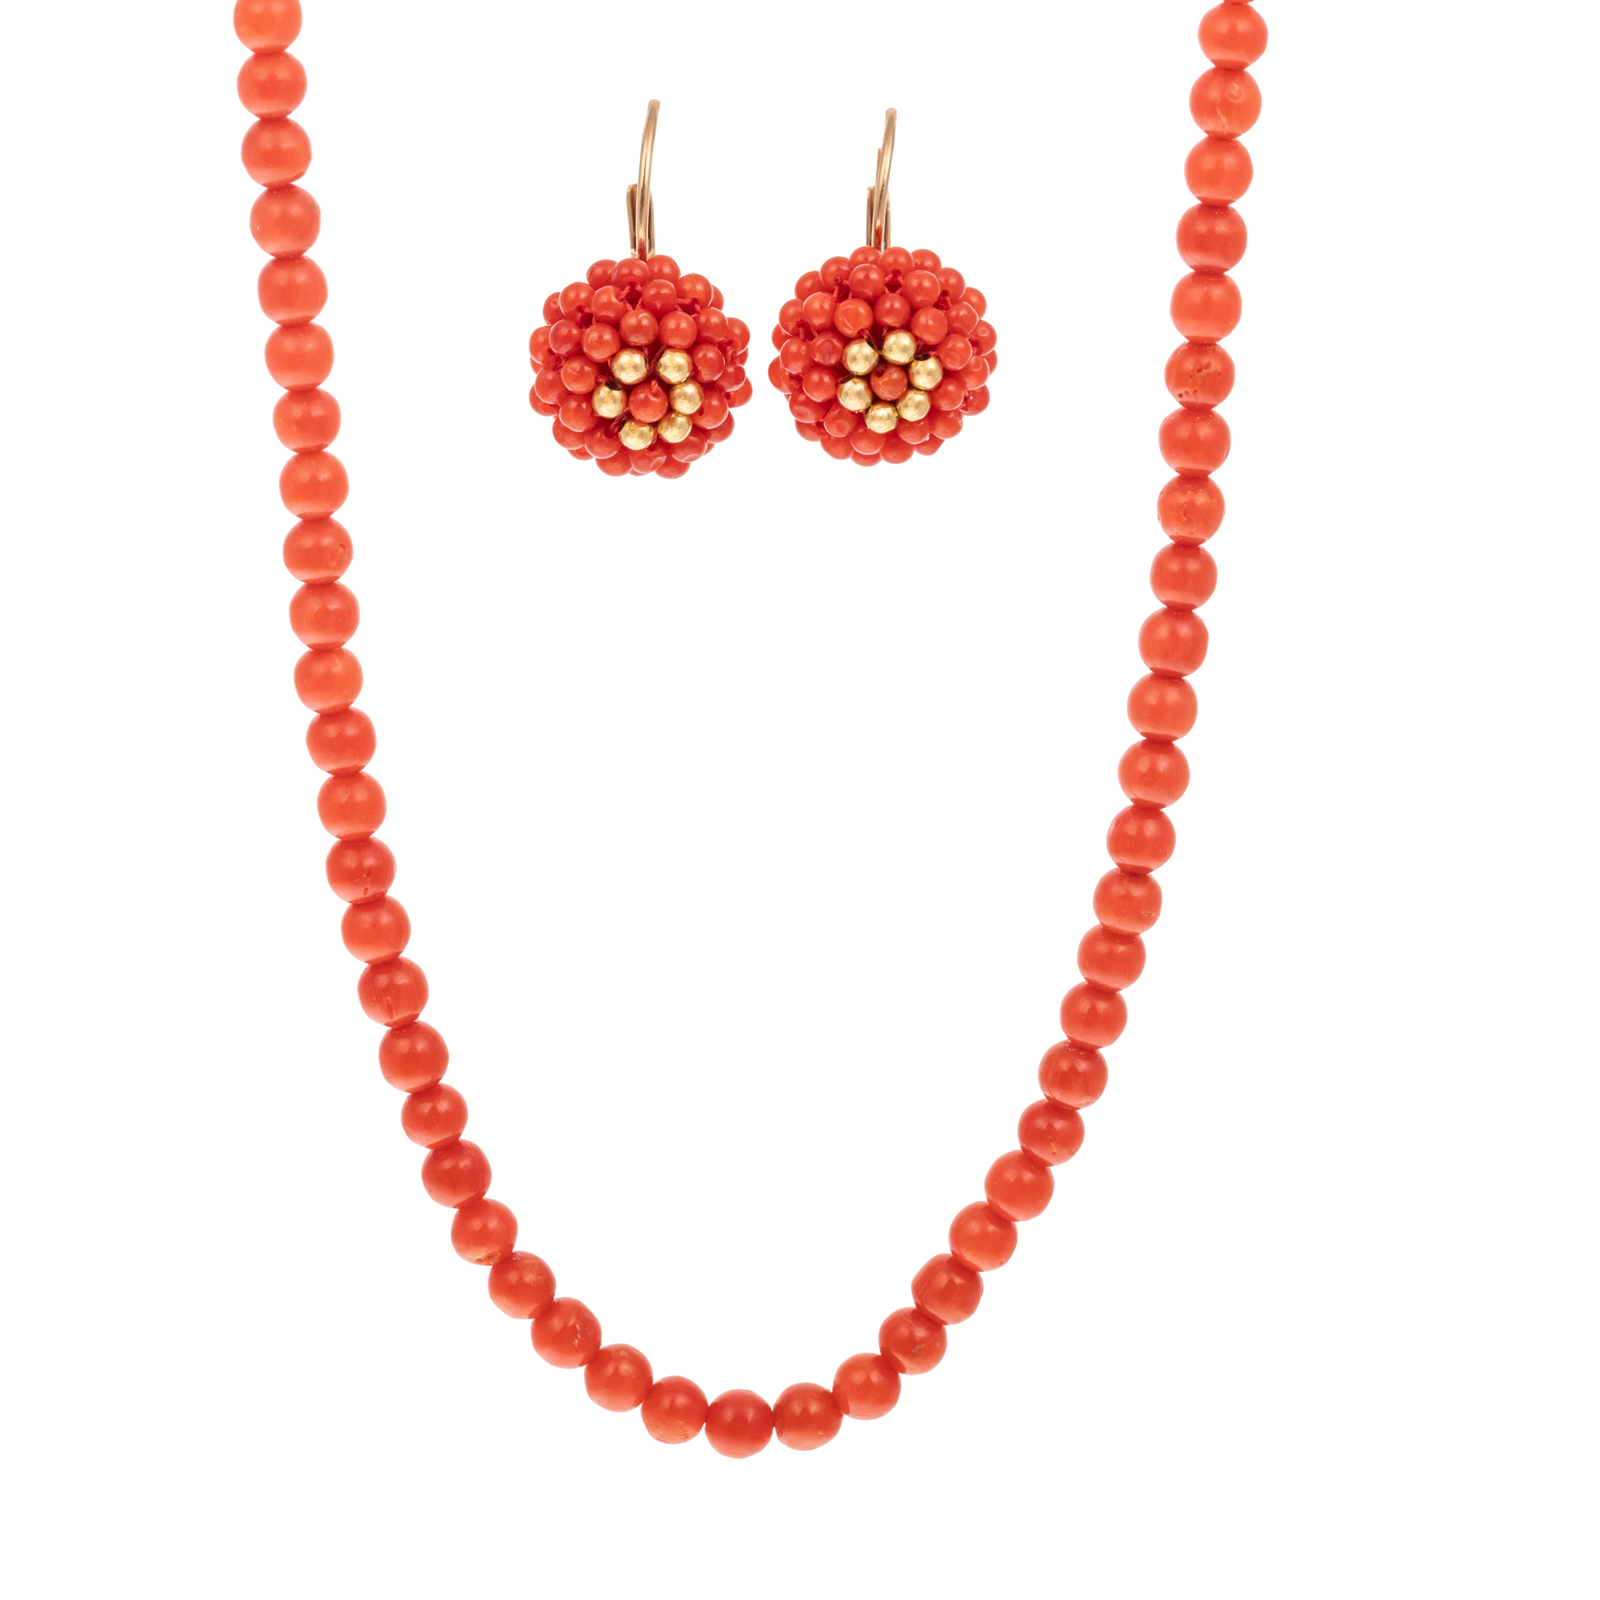 A CORAL BEADED NECKLACE & EARRINGS